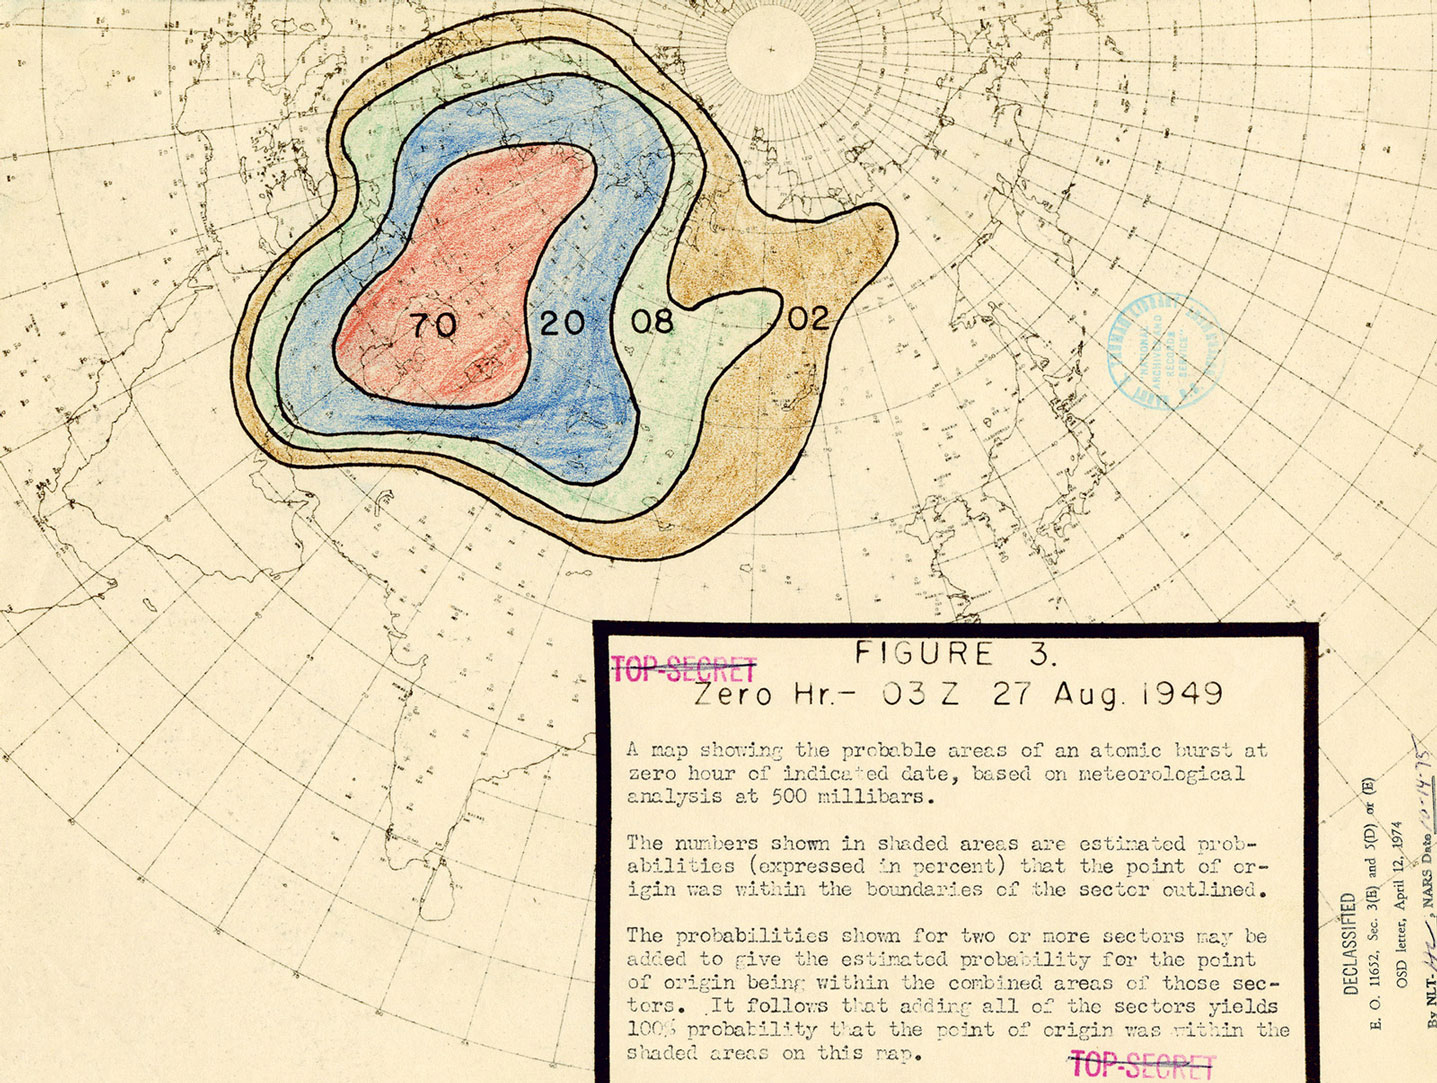 A 1949 United States Weather Bureau Report which shows the system on Alert Number 112 of the Atomic Detection System.